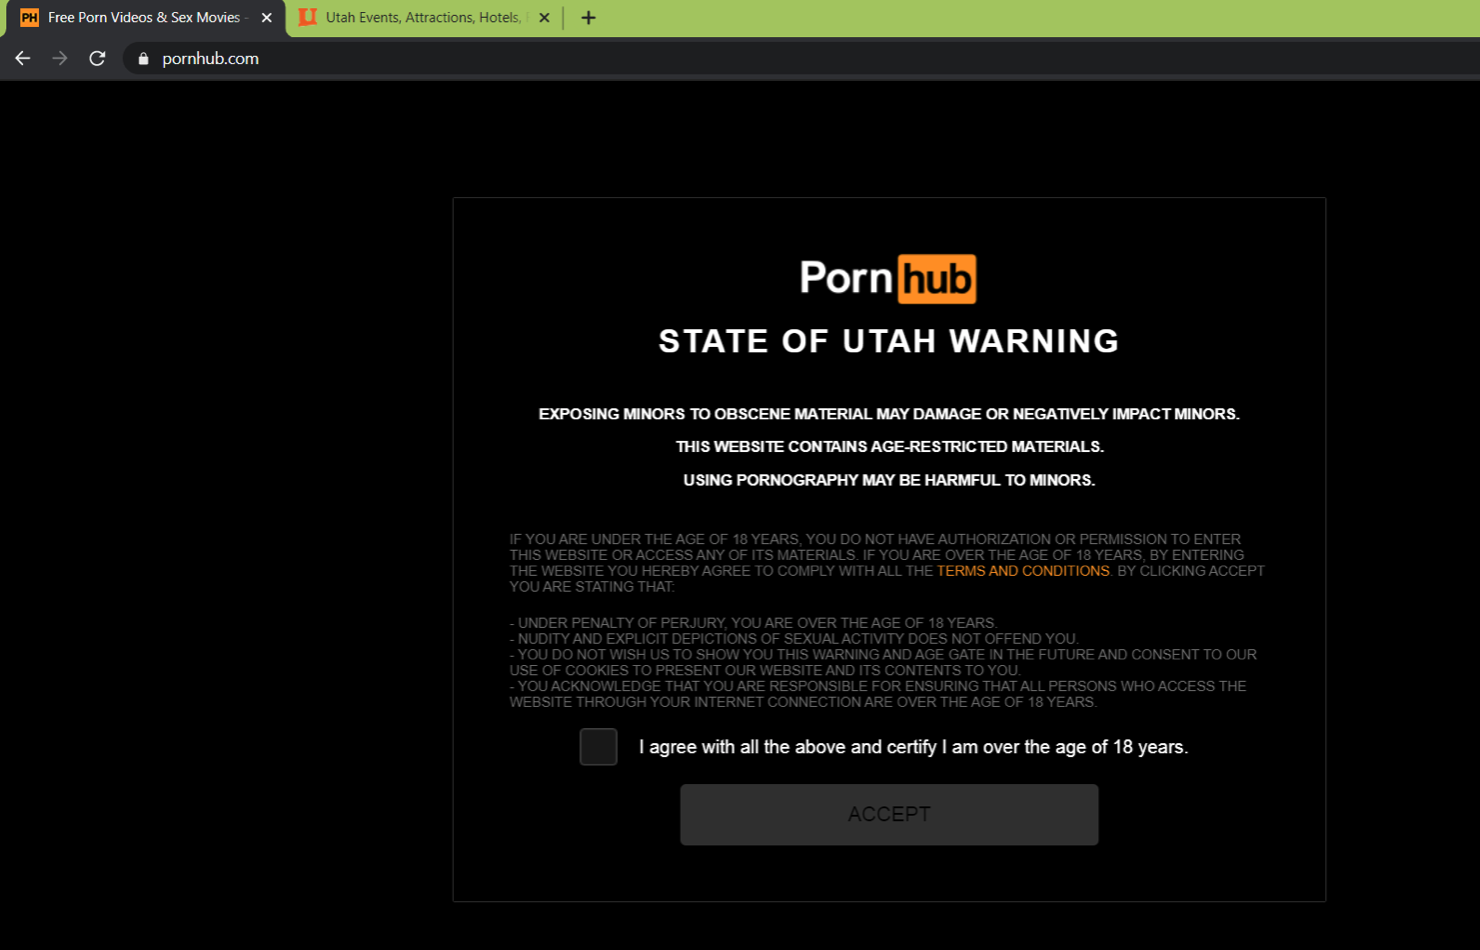 Example of required warning label for online porn in Utah